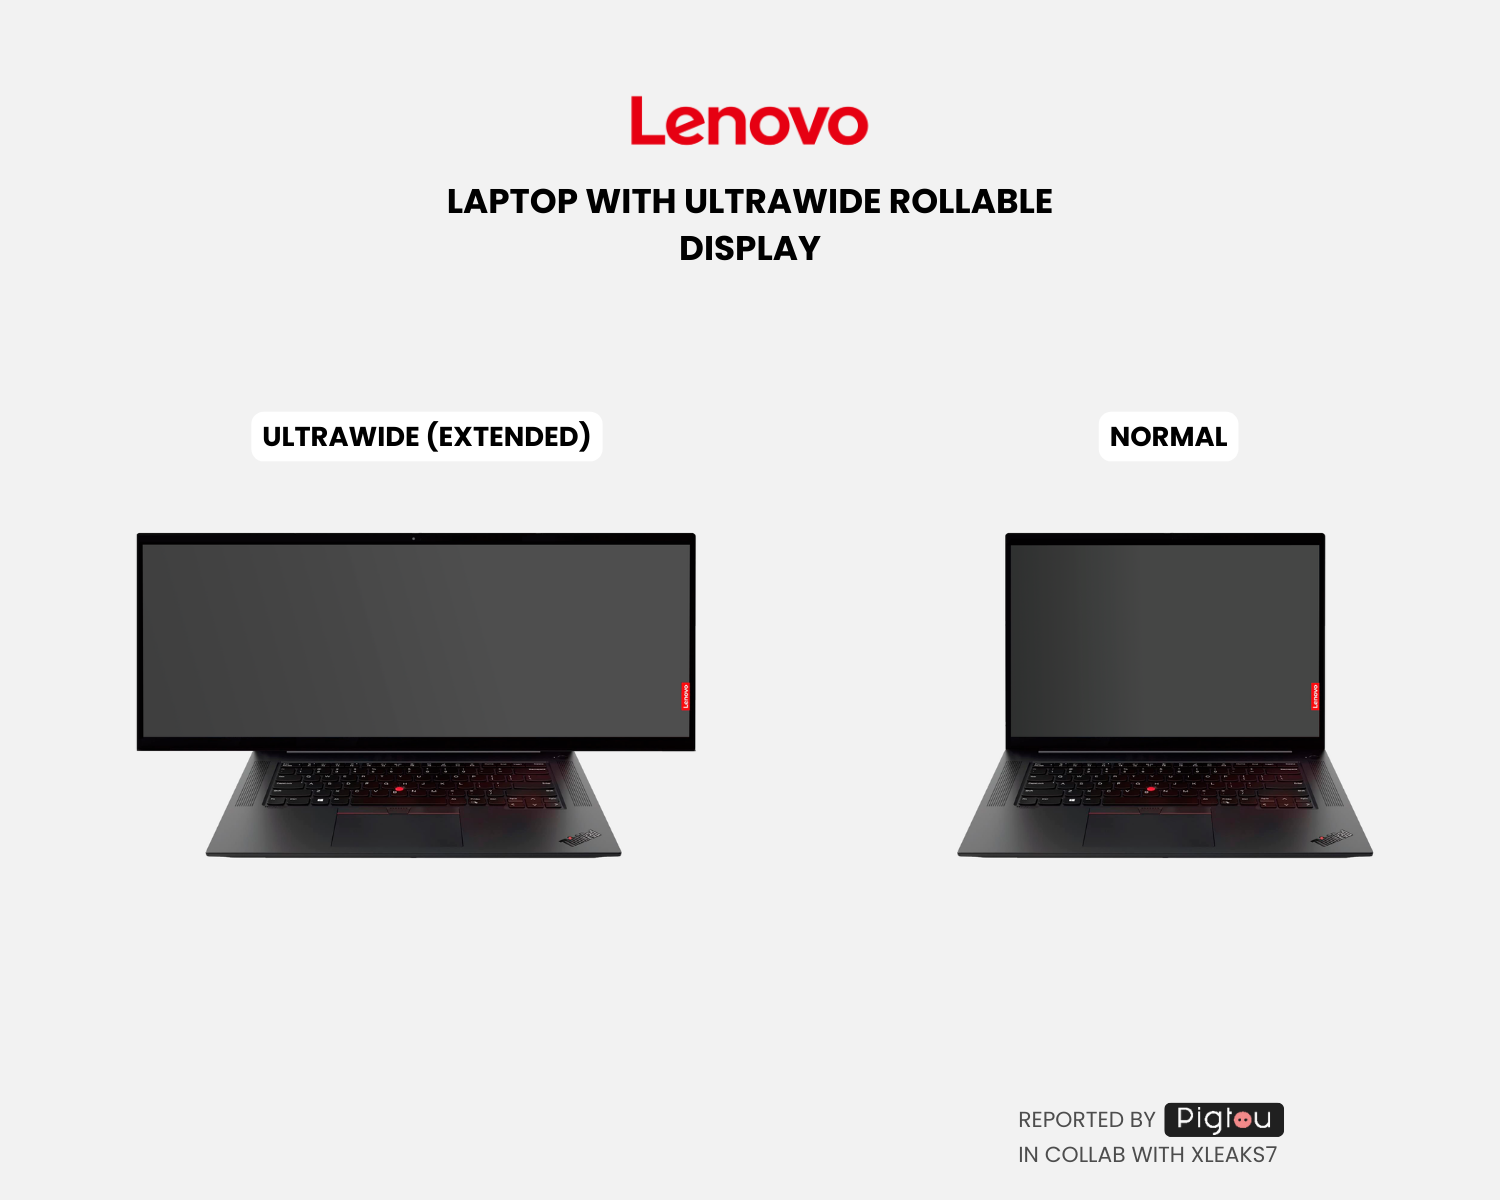 Lenovo laptop with ultrawide rollable screen